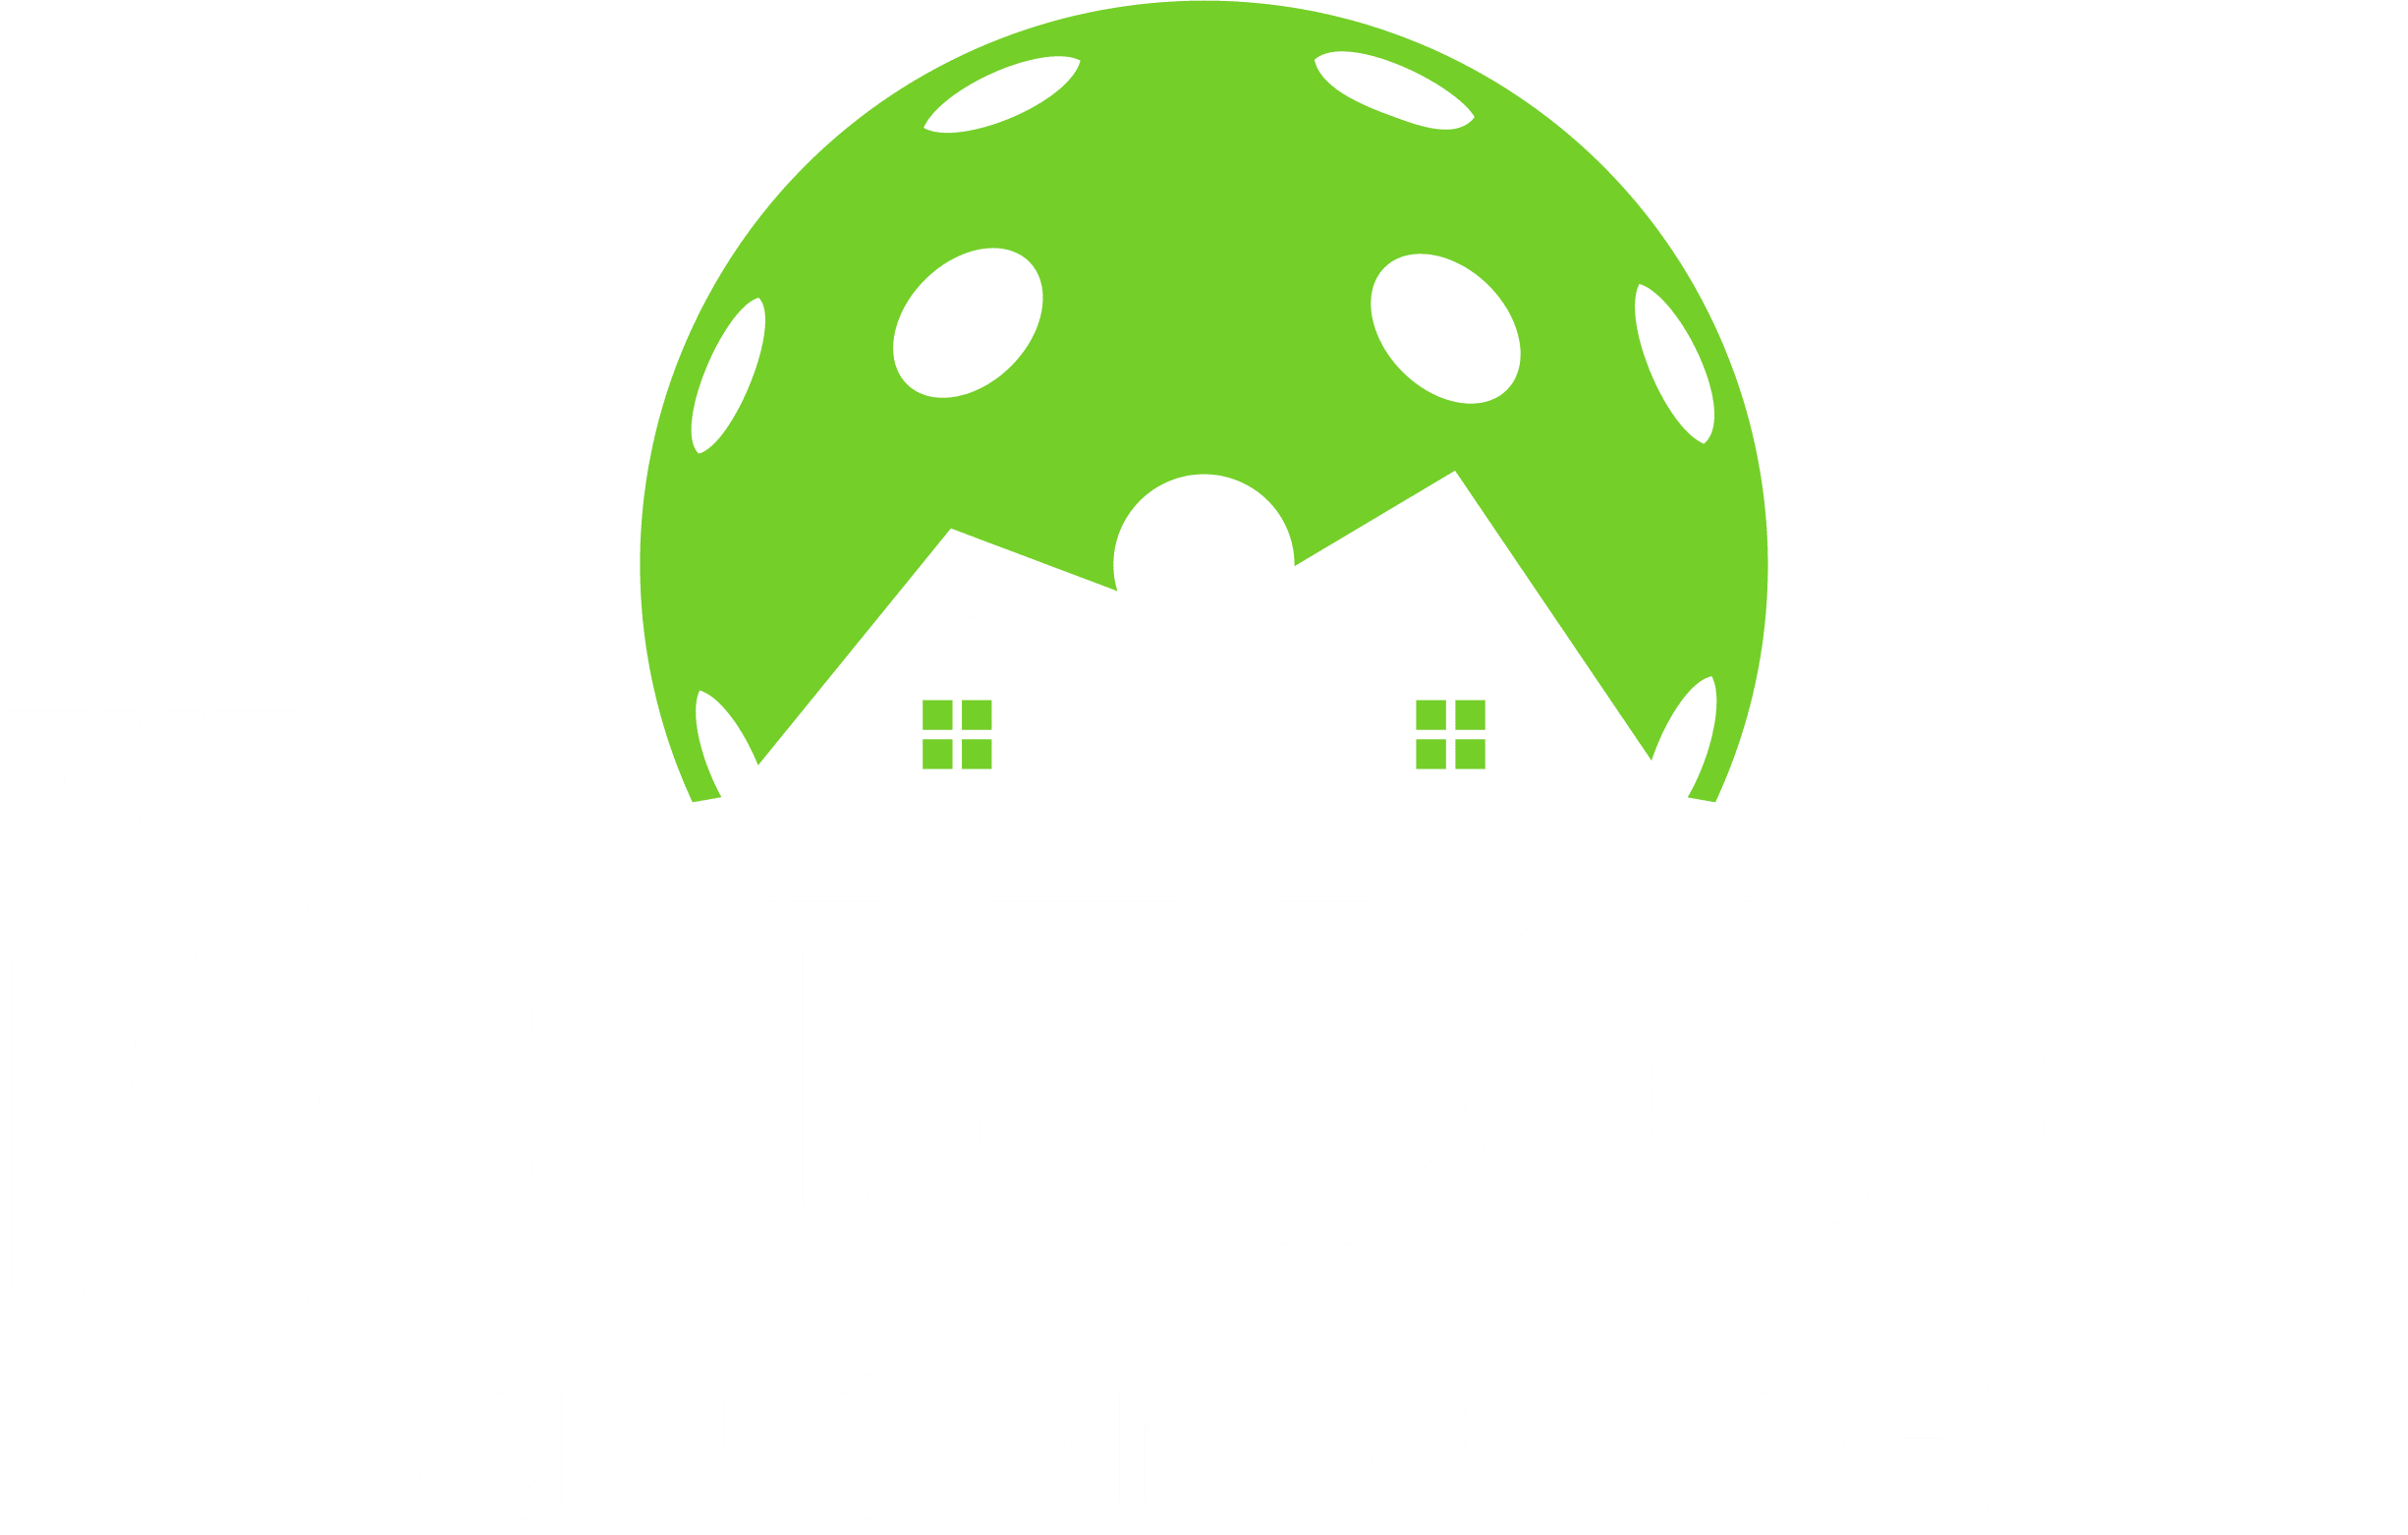 The Pickle Lodge